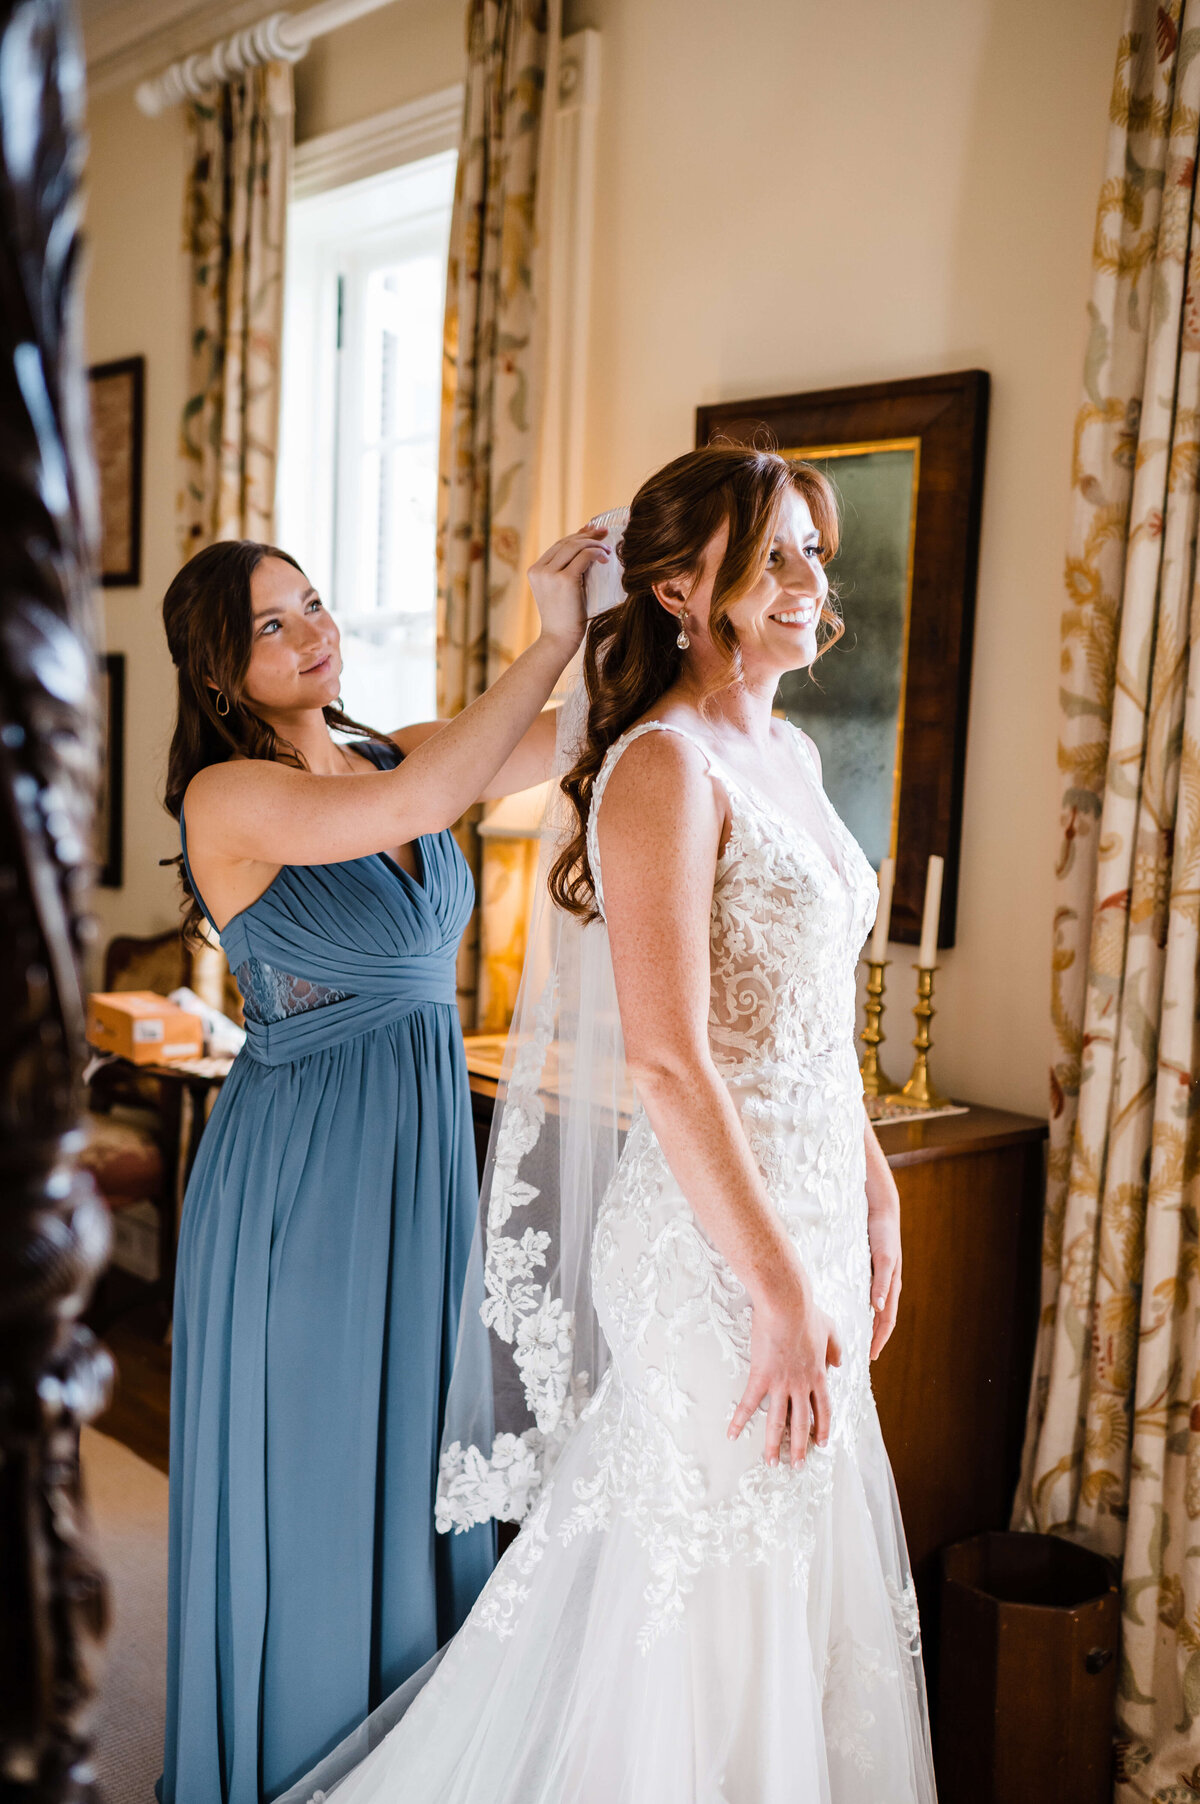 bridesmaid in a blue dress helps the bride put in her wedding veil photographed by Virginia wedding photographer